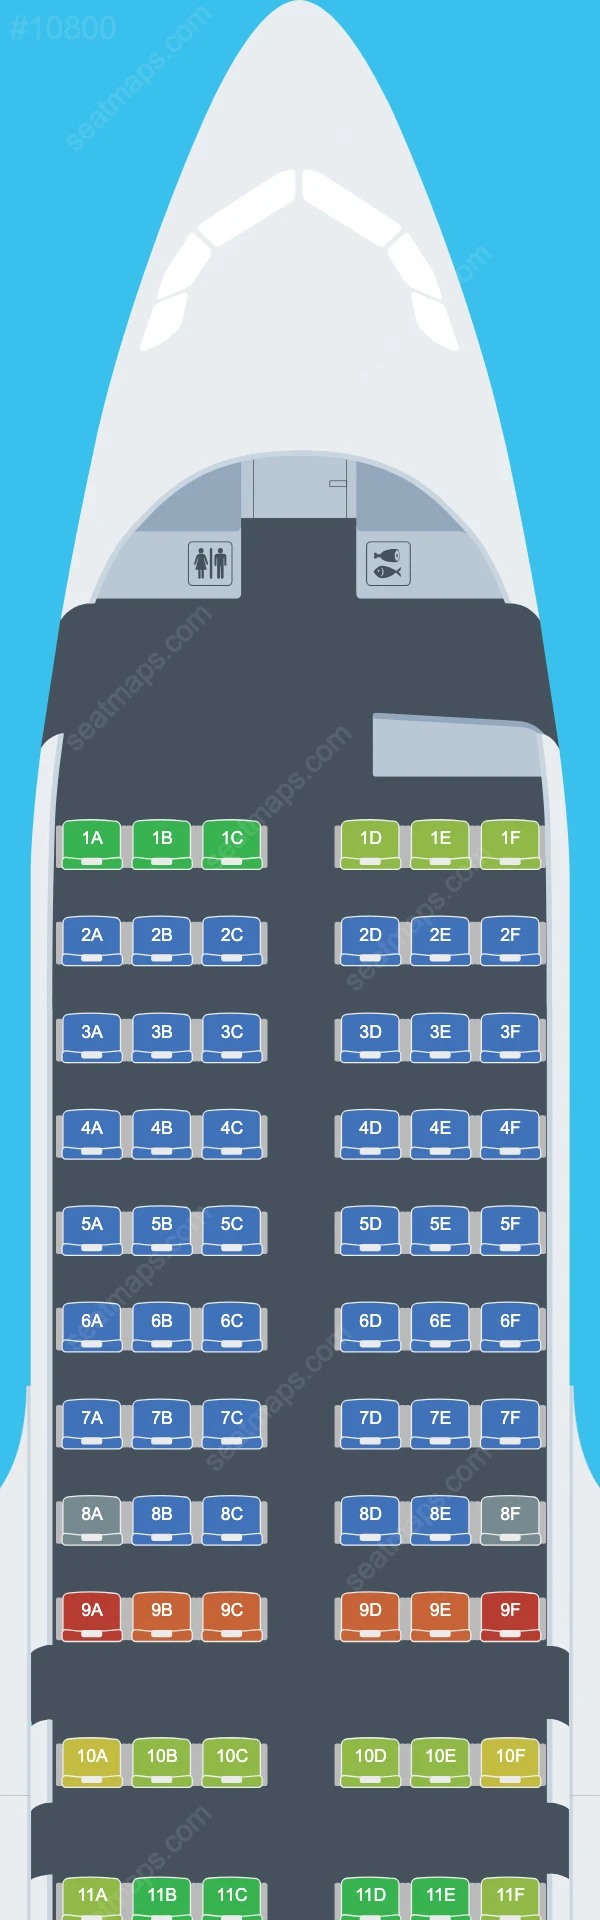 airBaltic Airbus A319-100 seatmap mobile preview